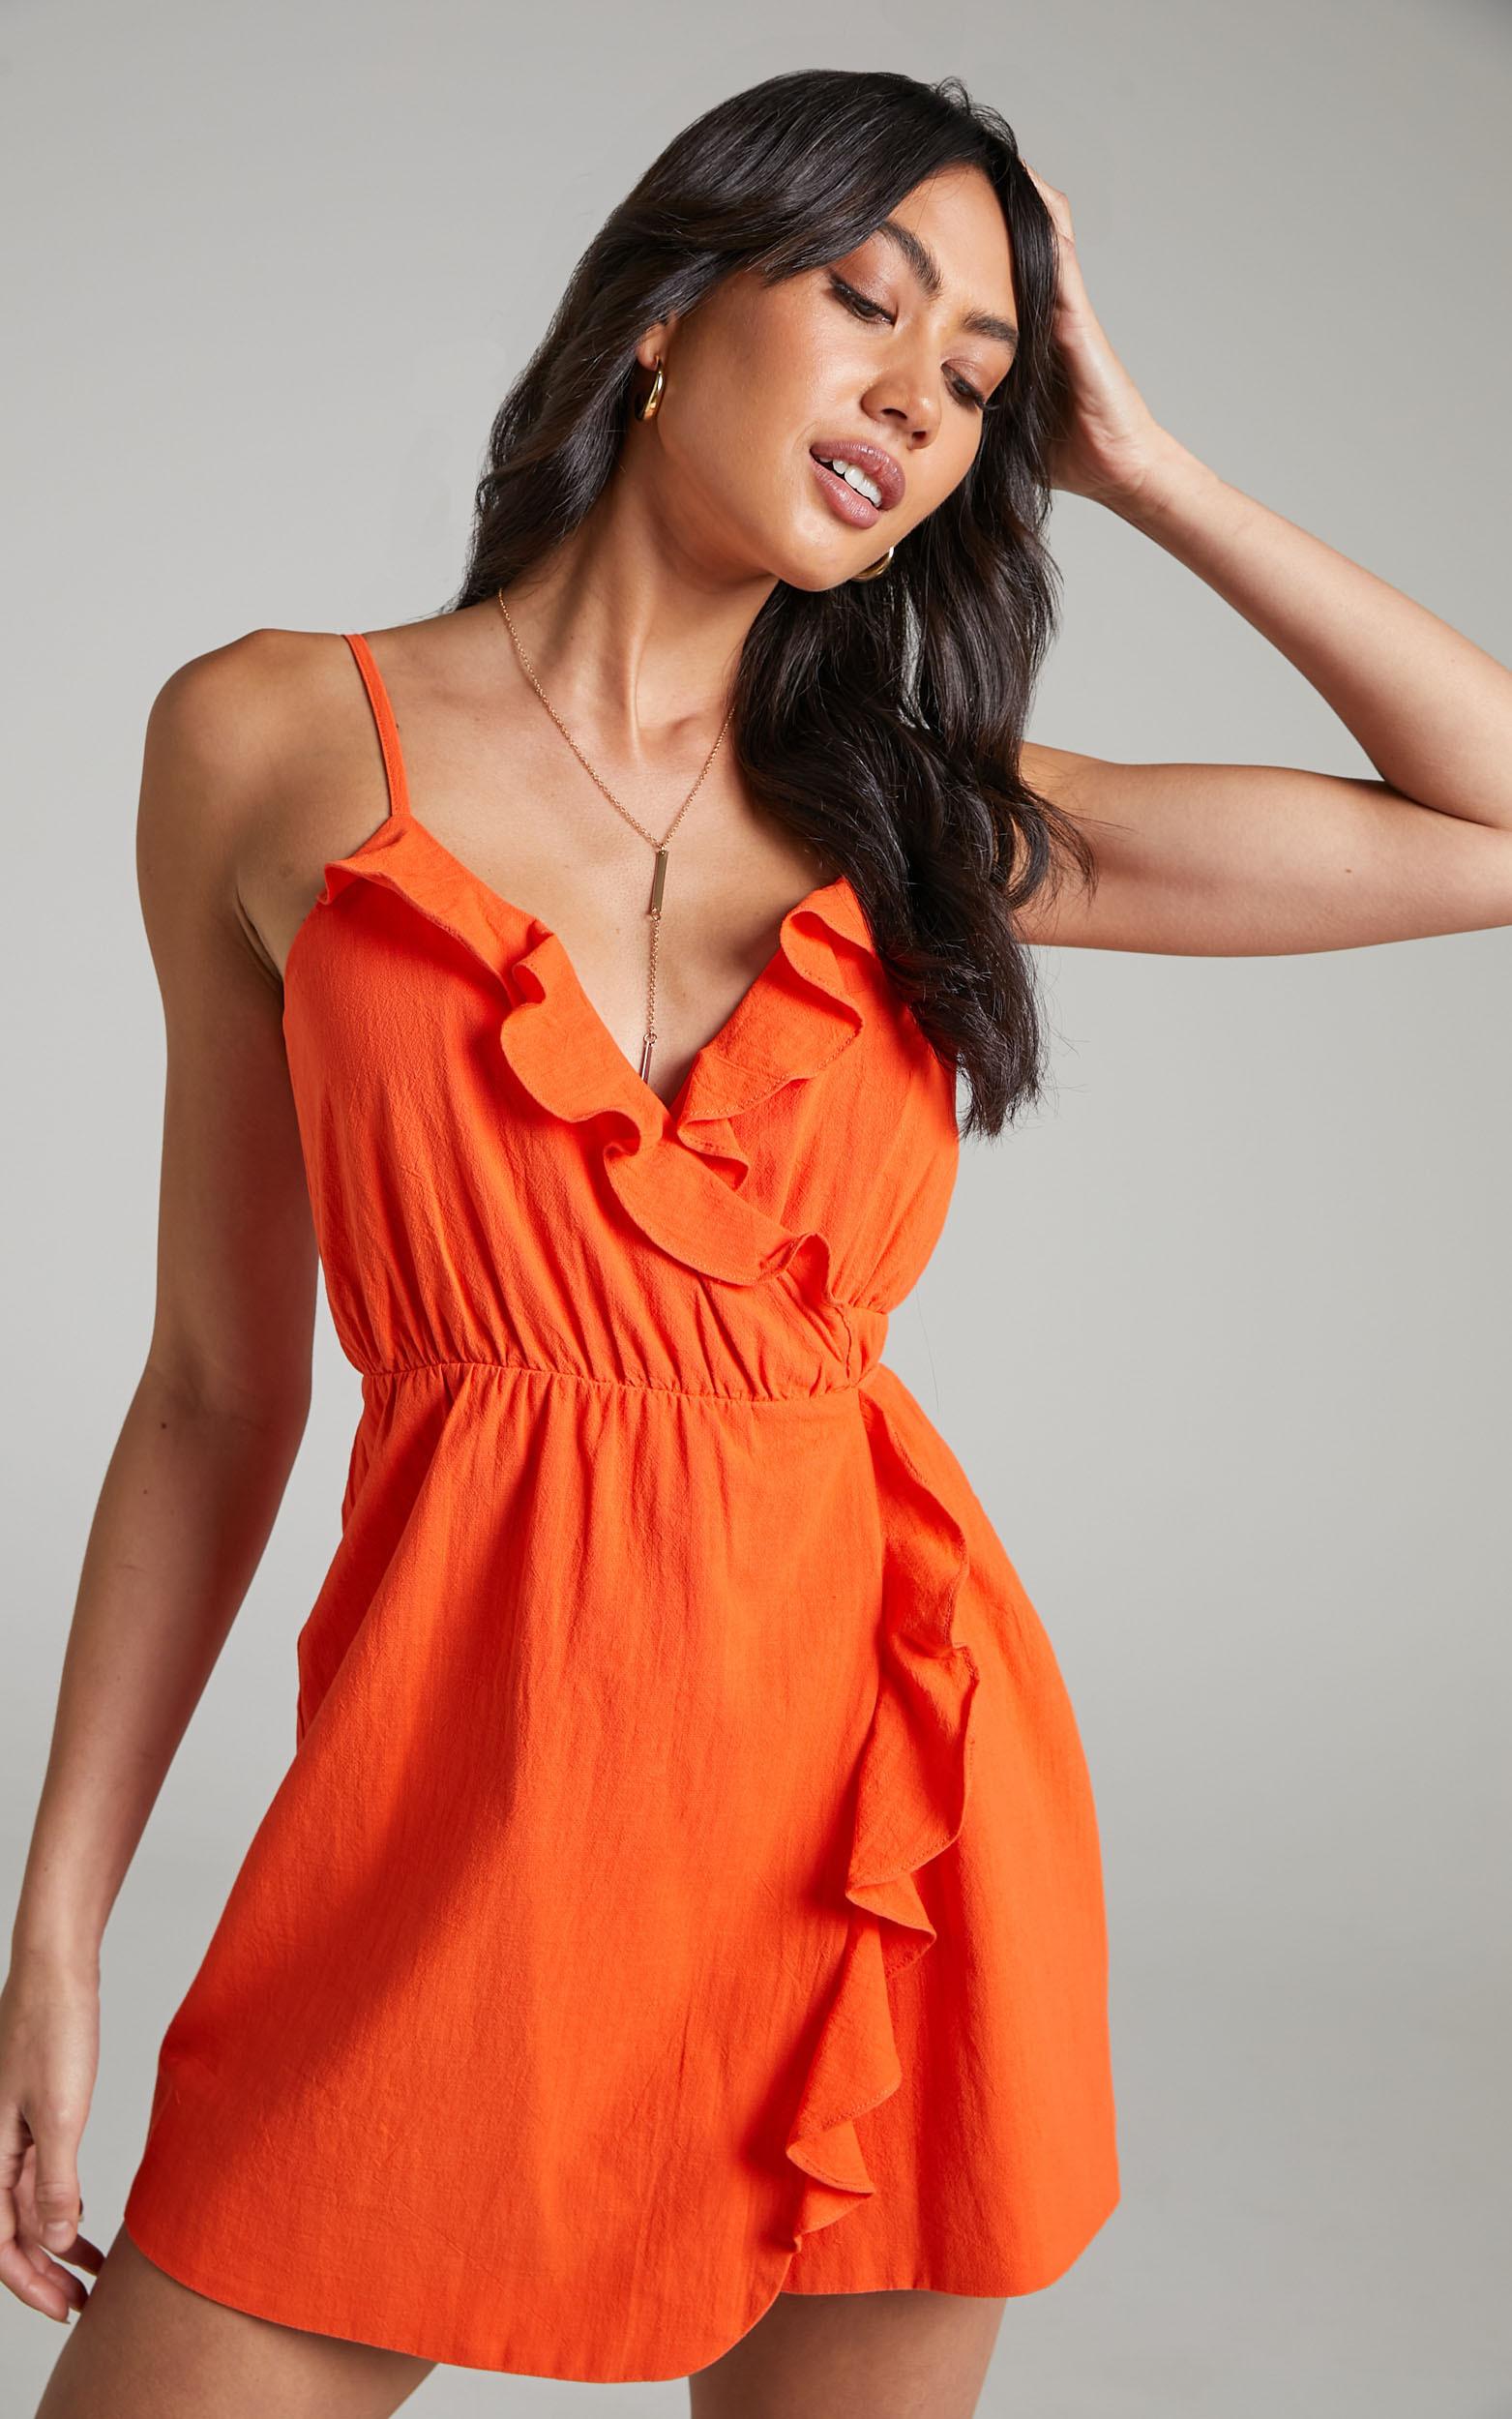 Aganda Strappy Frill Detail Wrap Mini Dress in Oxy Fire - 06, ORG1, hi-res image number null